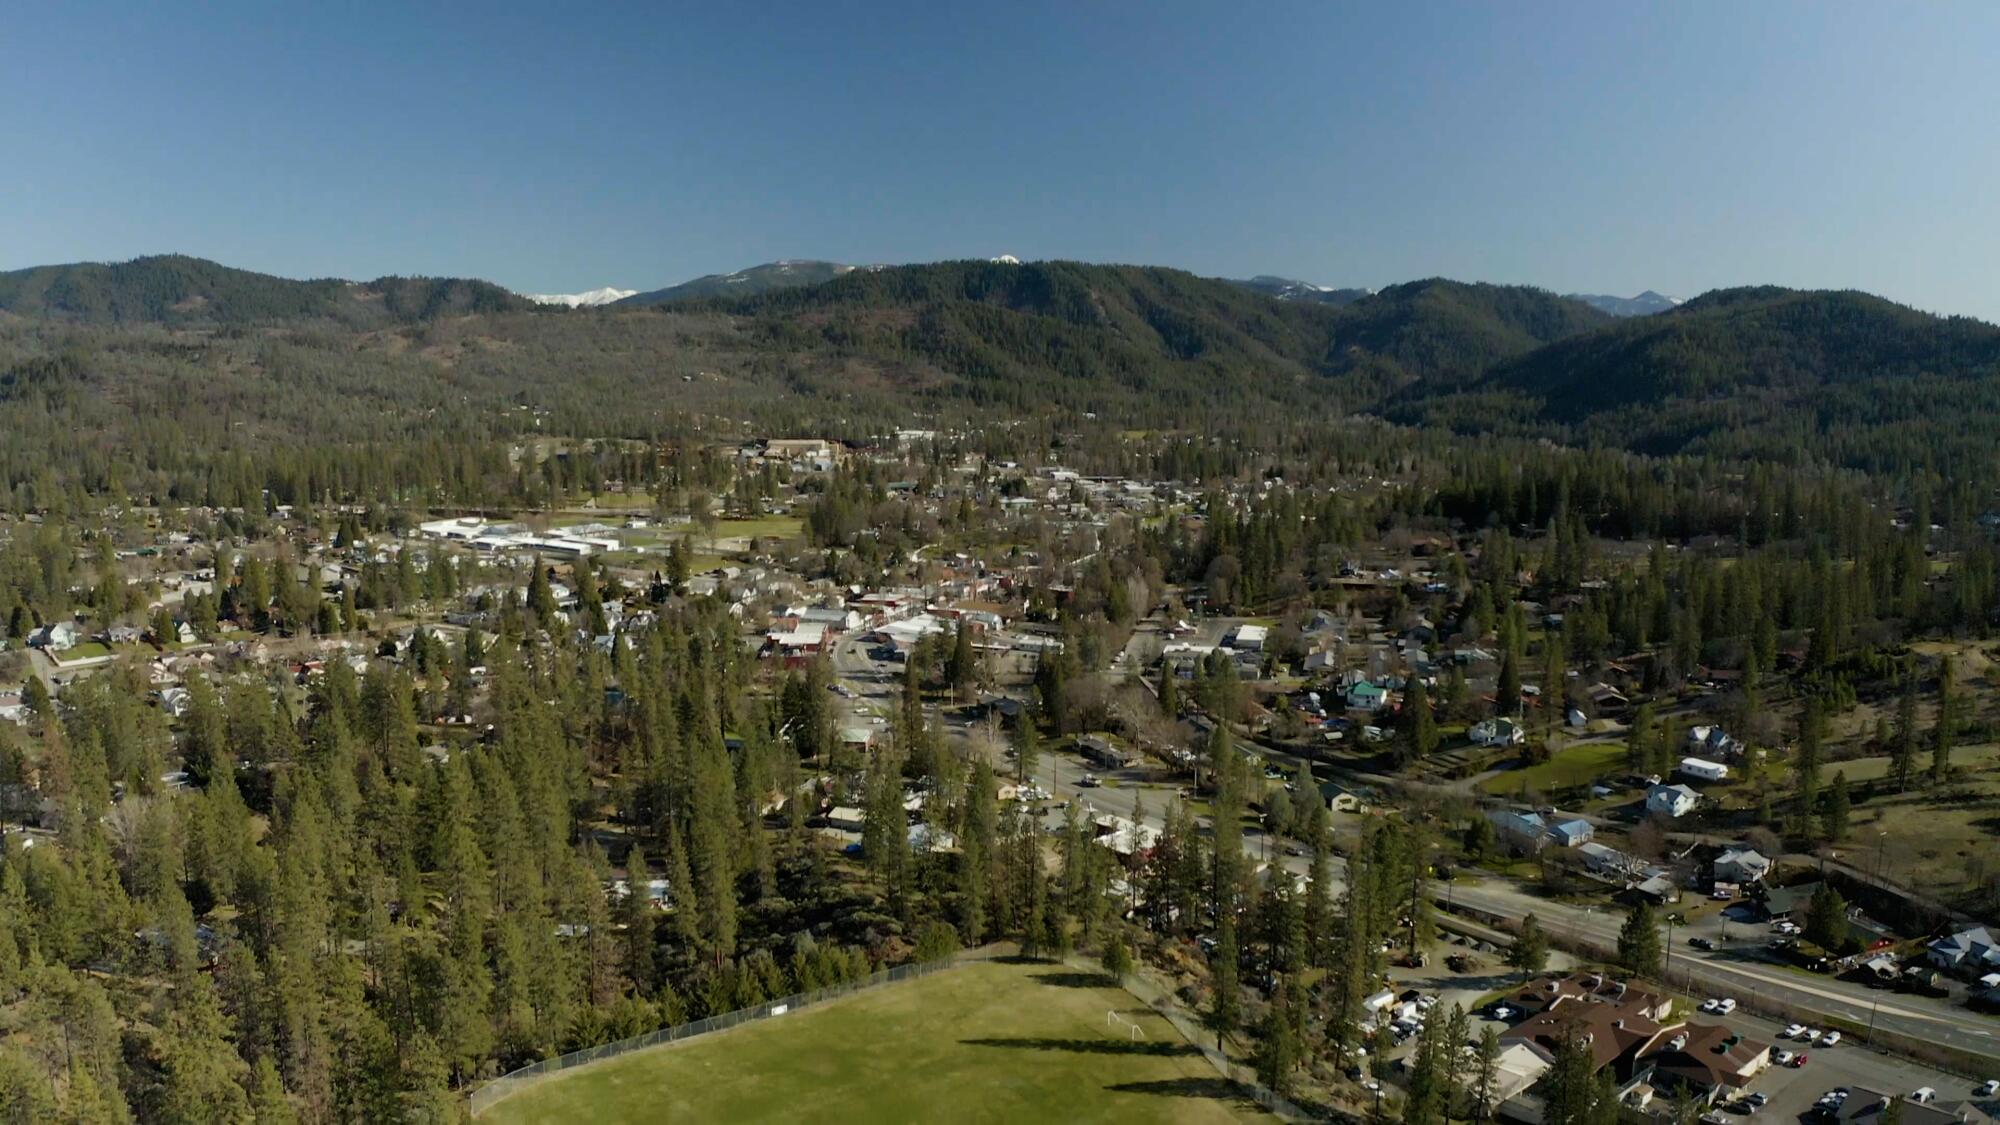 Weaverville, Calif., a Gold Rush town founded in 1850